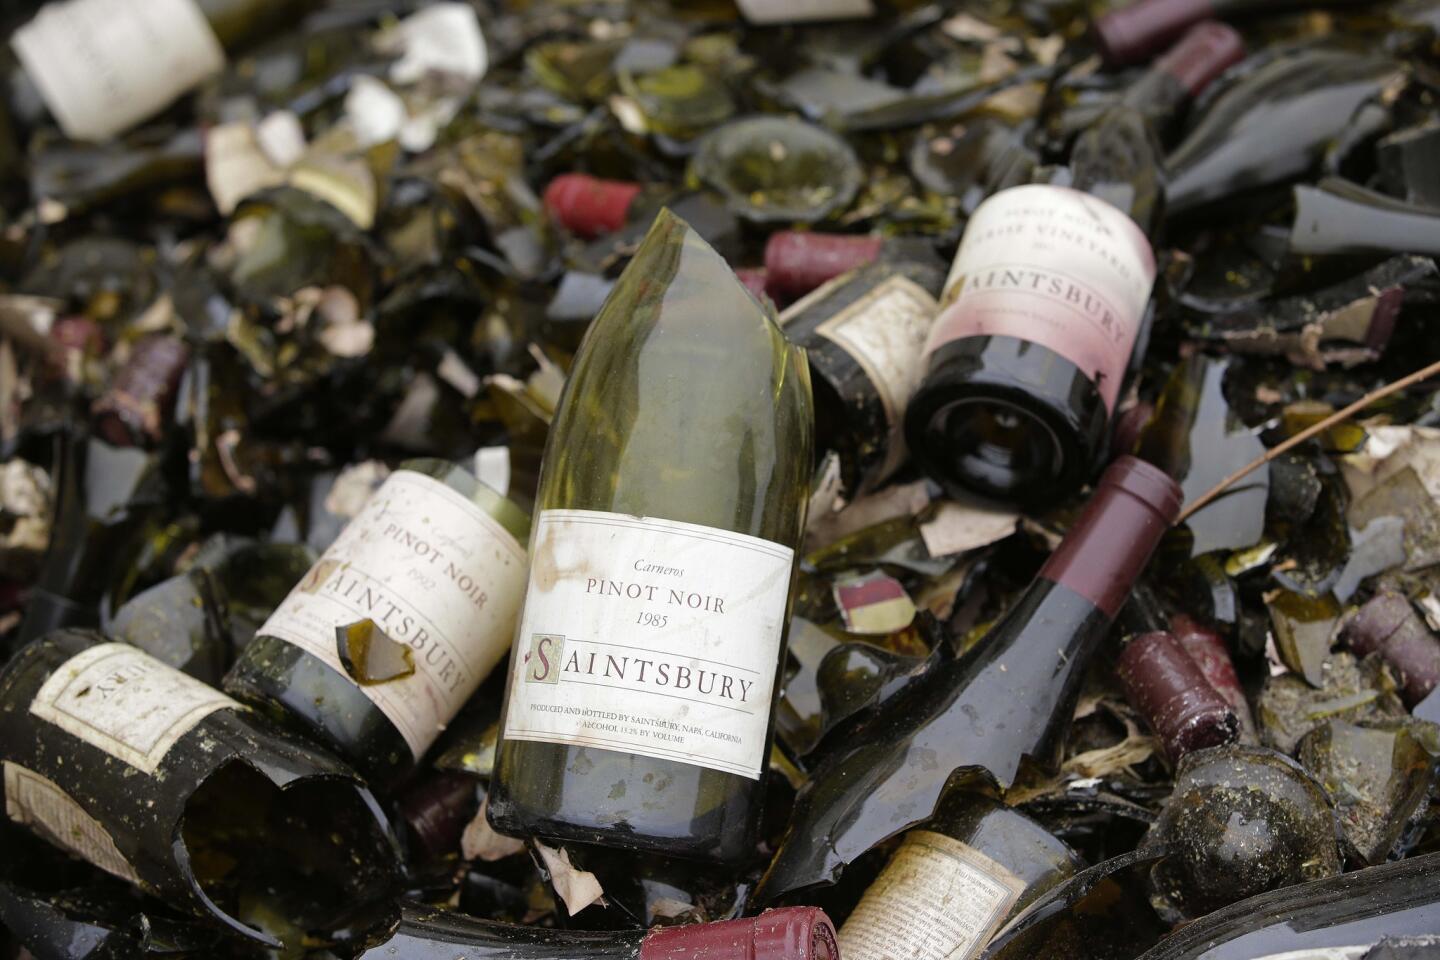 The Aug. 24 earthquake near Napa, Calif., destroyed much of the "library wine" collection at Saintsbury winery, a loss considered irreplaceable.